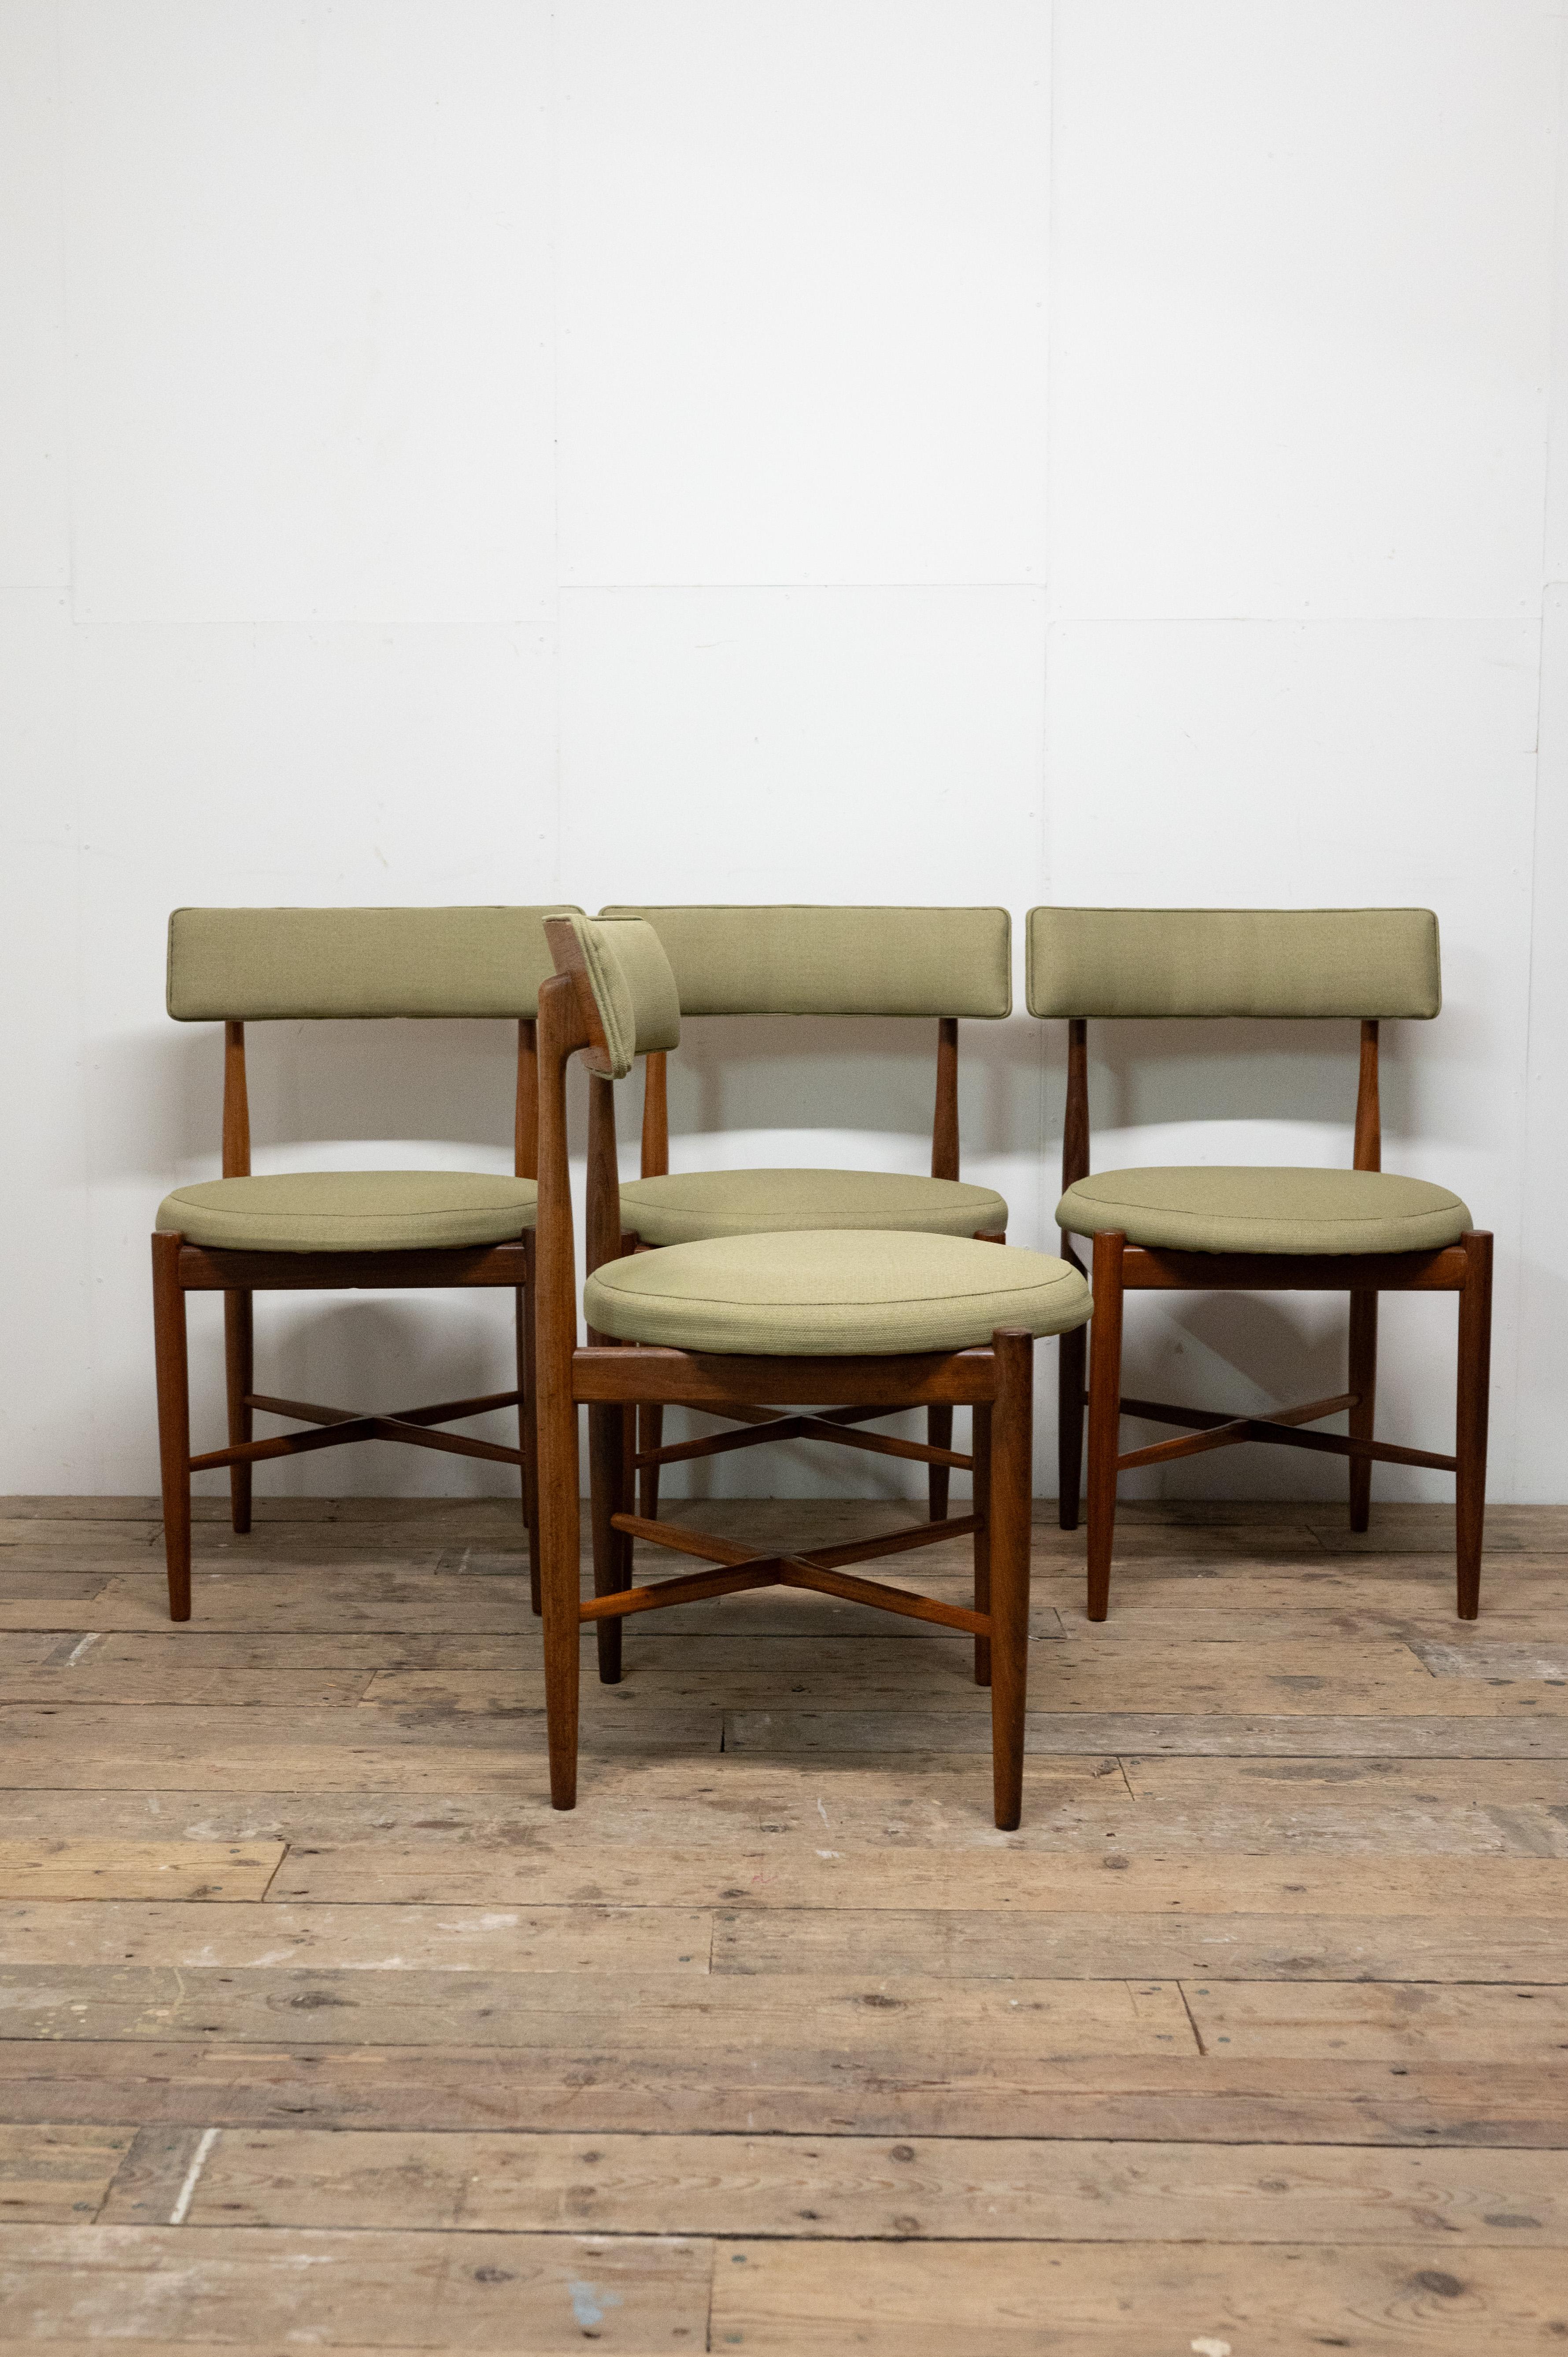 G Plan Teak Fresco Dining Chairs by Victor B Wilkins  4  Newly Upholstered 1